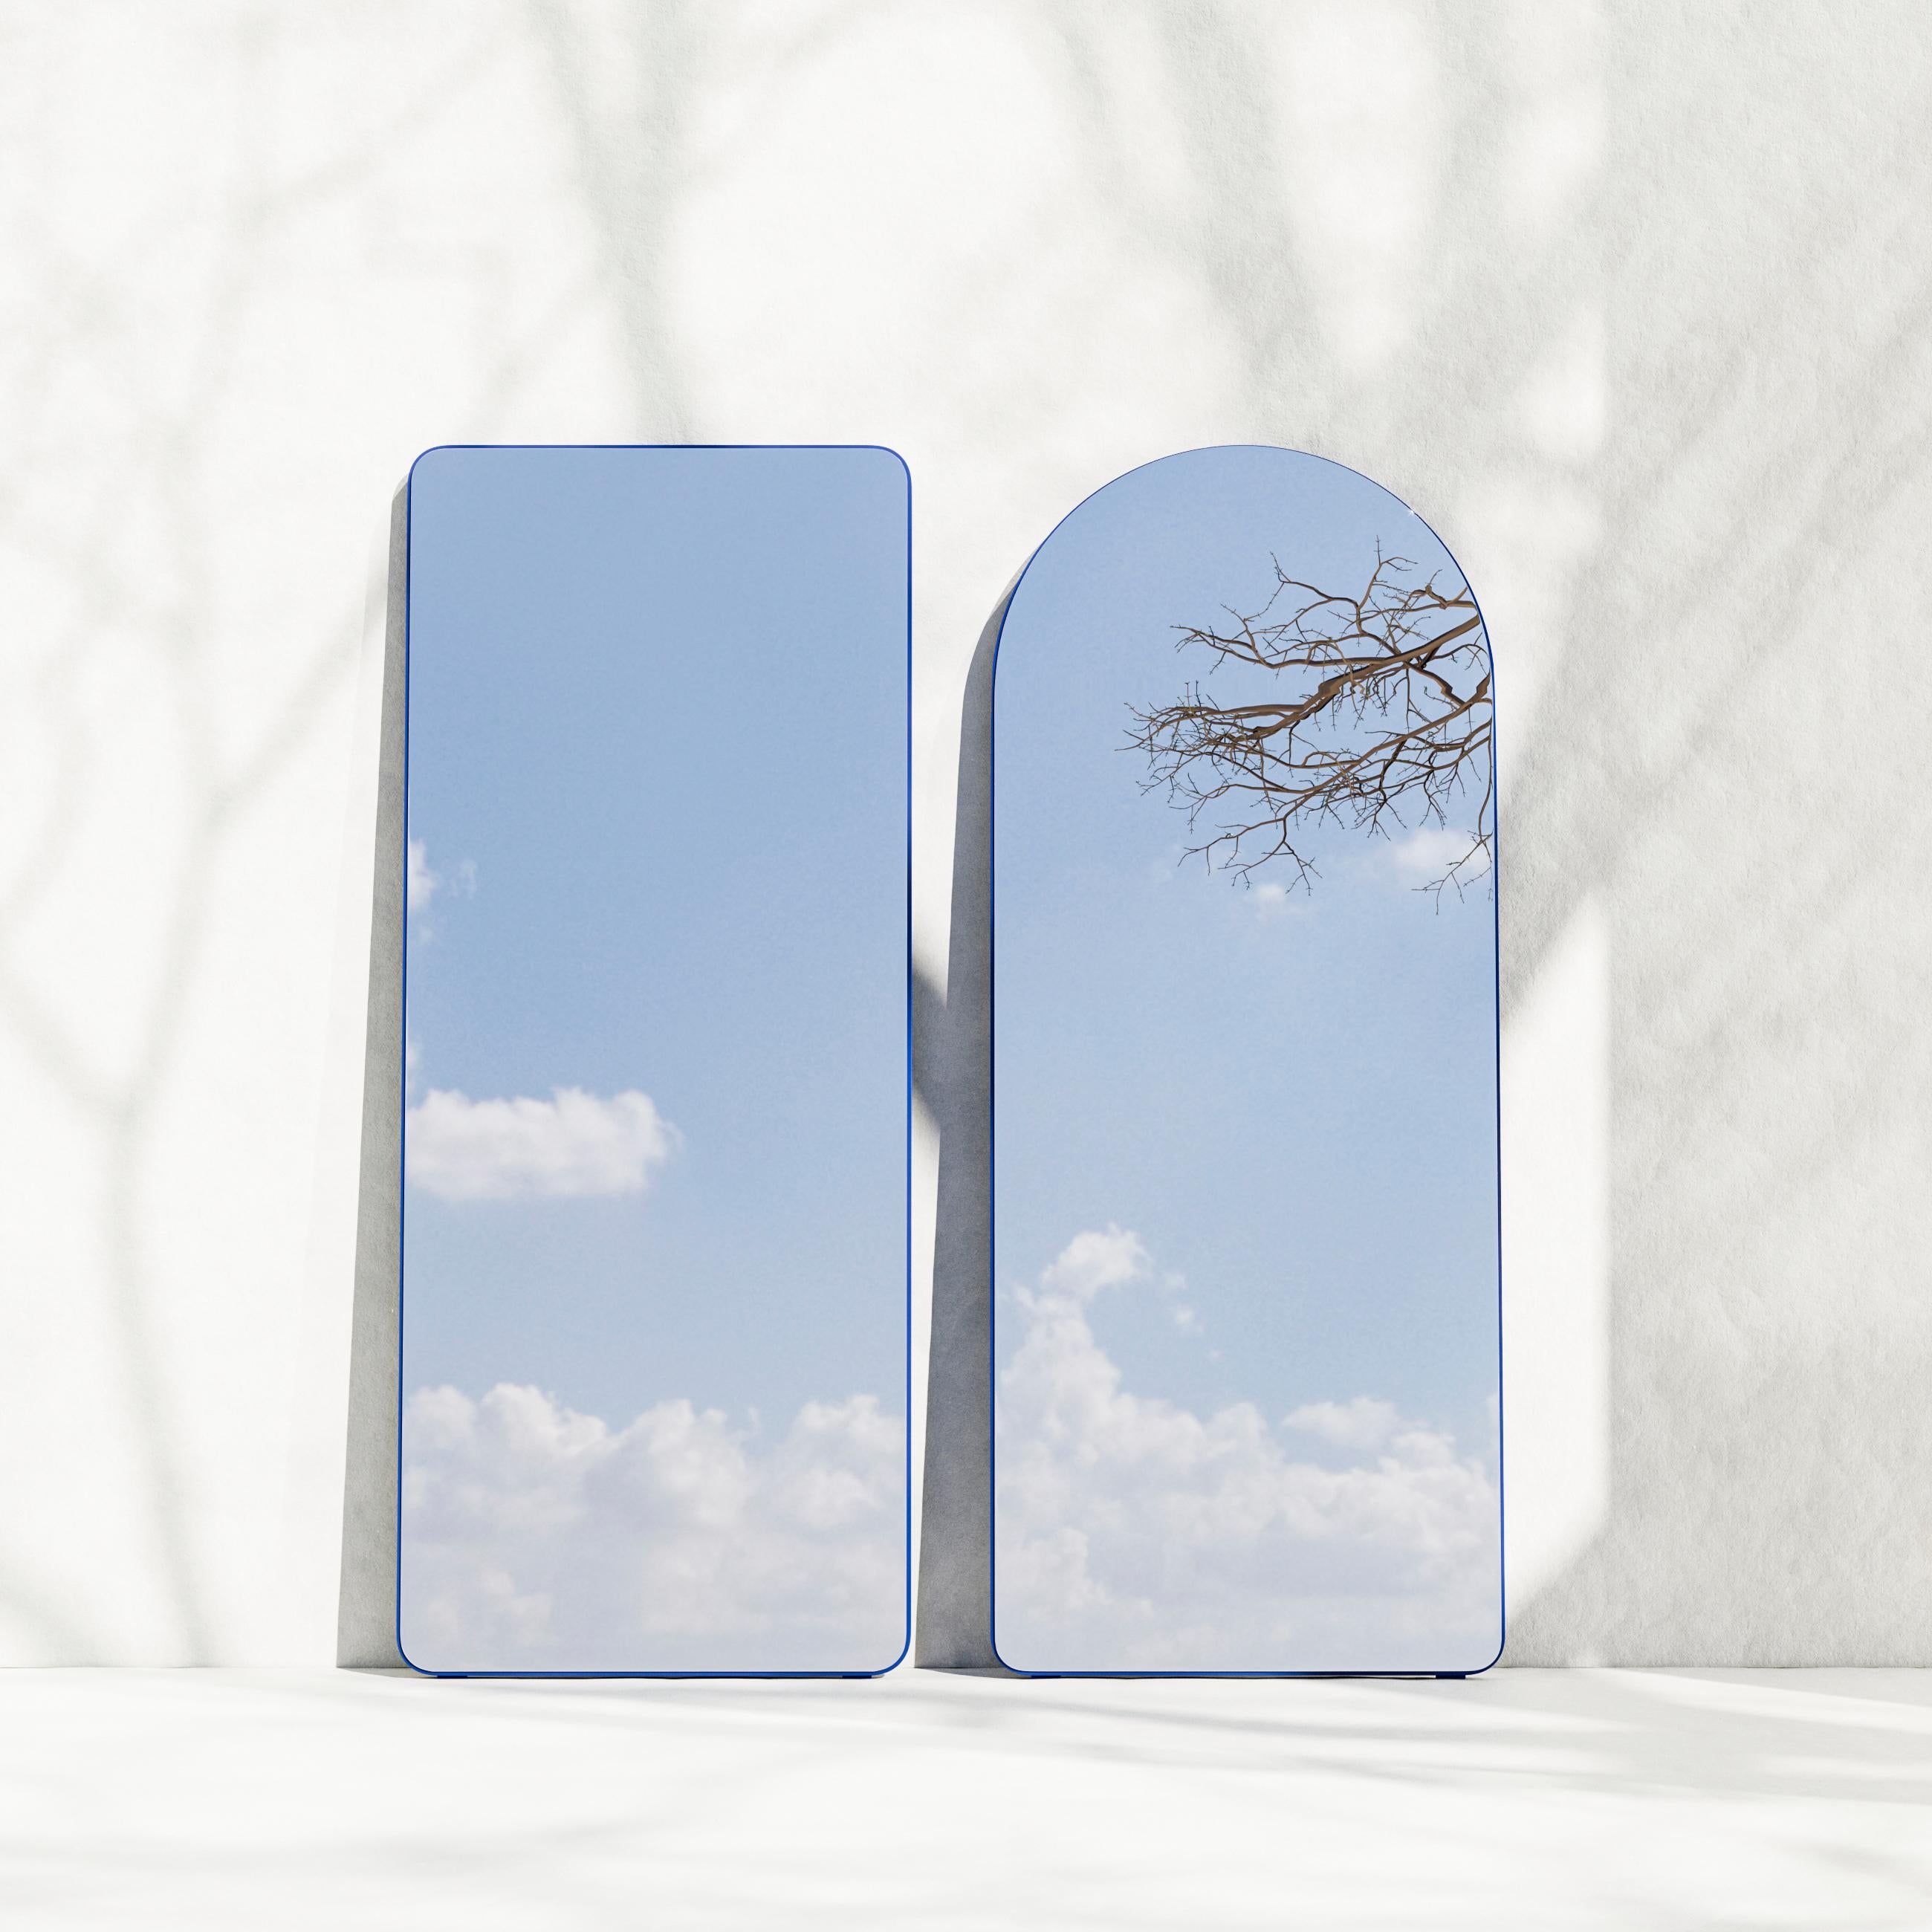 Contemporary mirror 'Loveself 05' by Oitoproducts
 Color RAL 3015

Dimensions:
W 70 cm x H 180 cm x D 4 cm
W 27.5 in x H 71 in x D 1.3 in

Materials: Painted ecological water paint MDF, silver glass mirror, special rubber feet.

About
LOVESELF is a